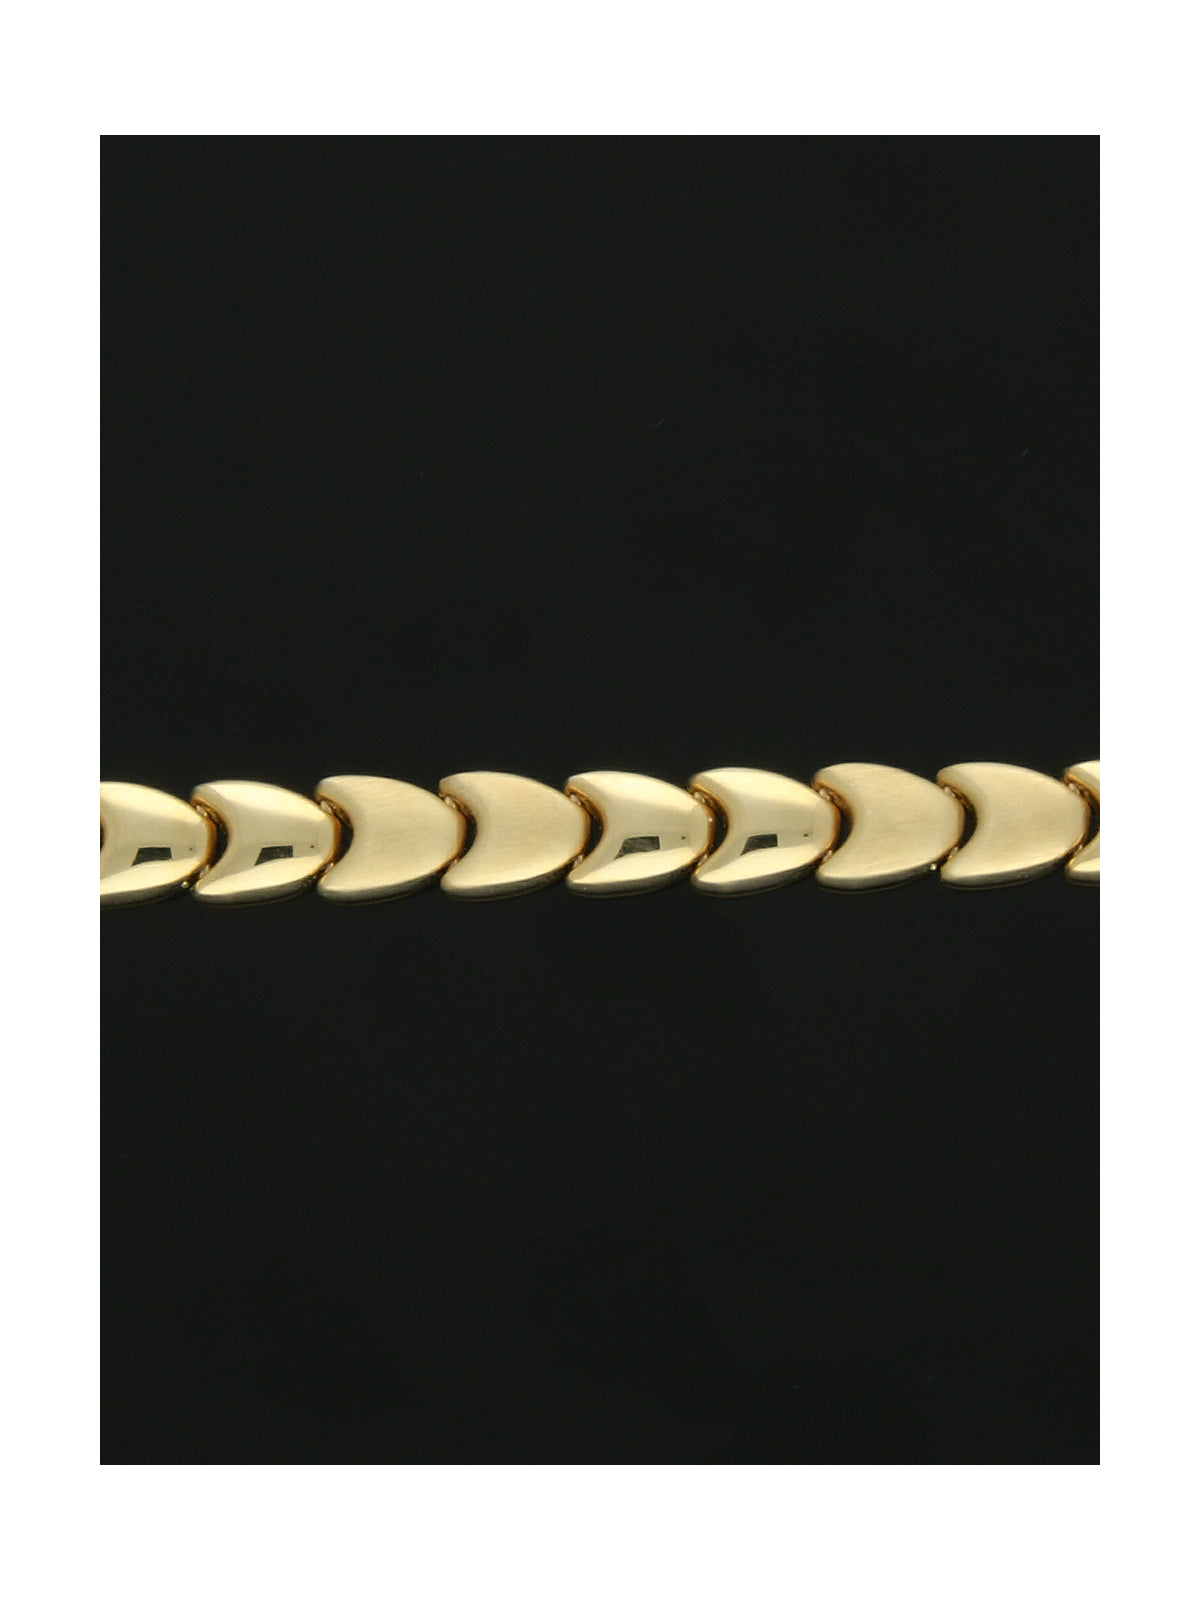 Polished Chevron Bracelet in 9ct Yellow Gold